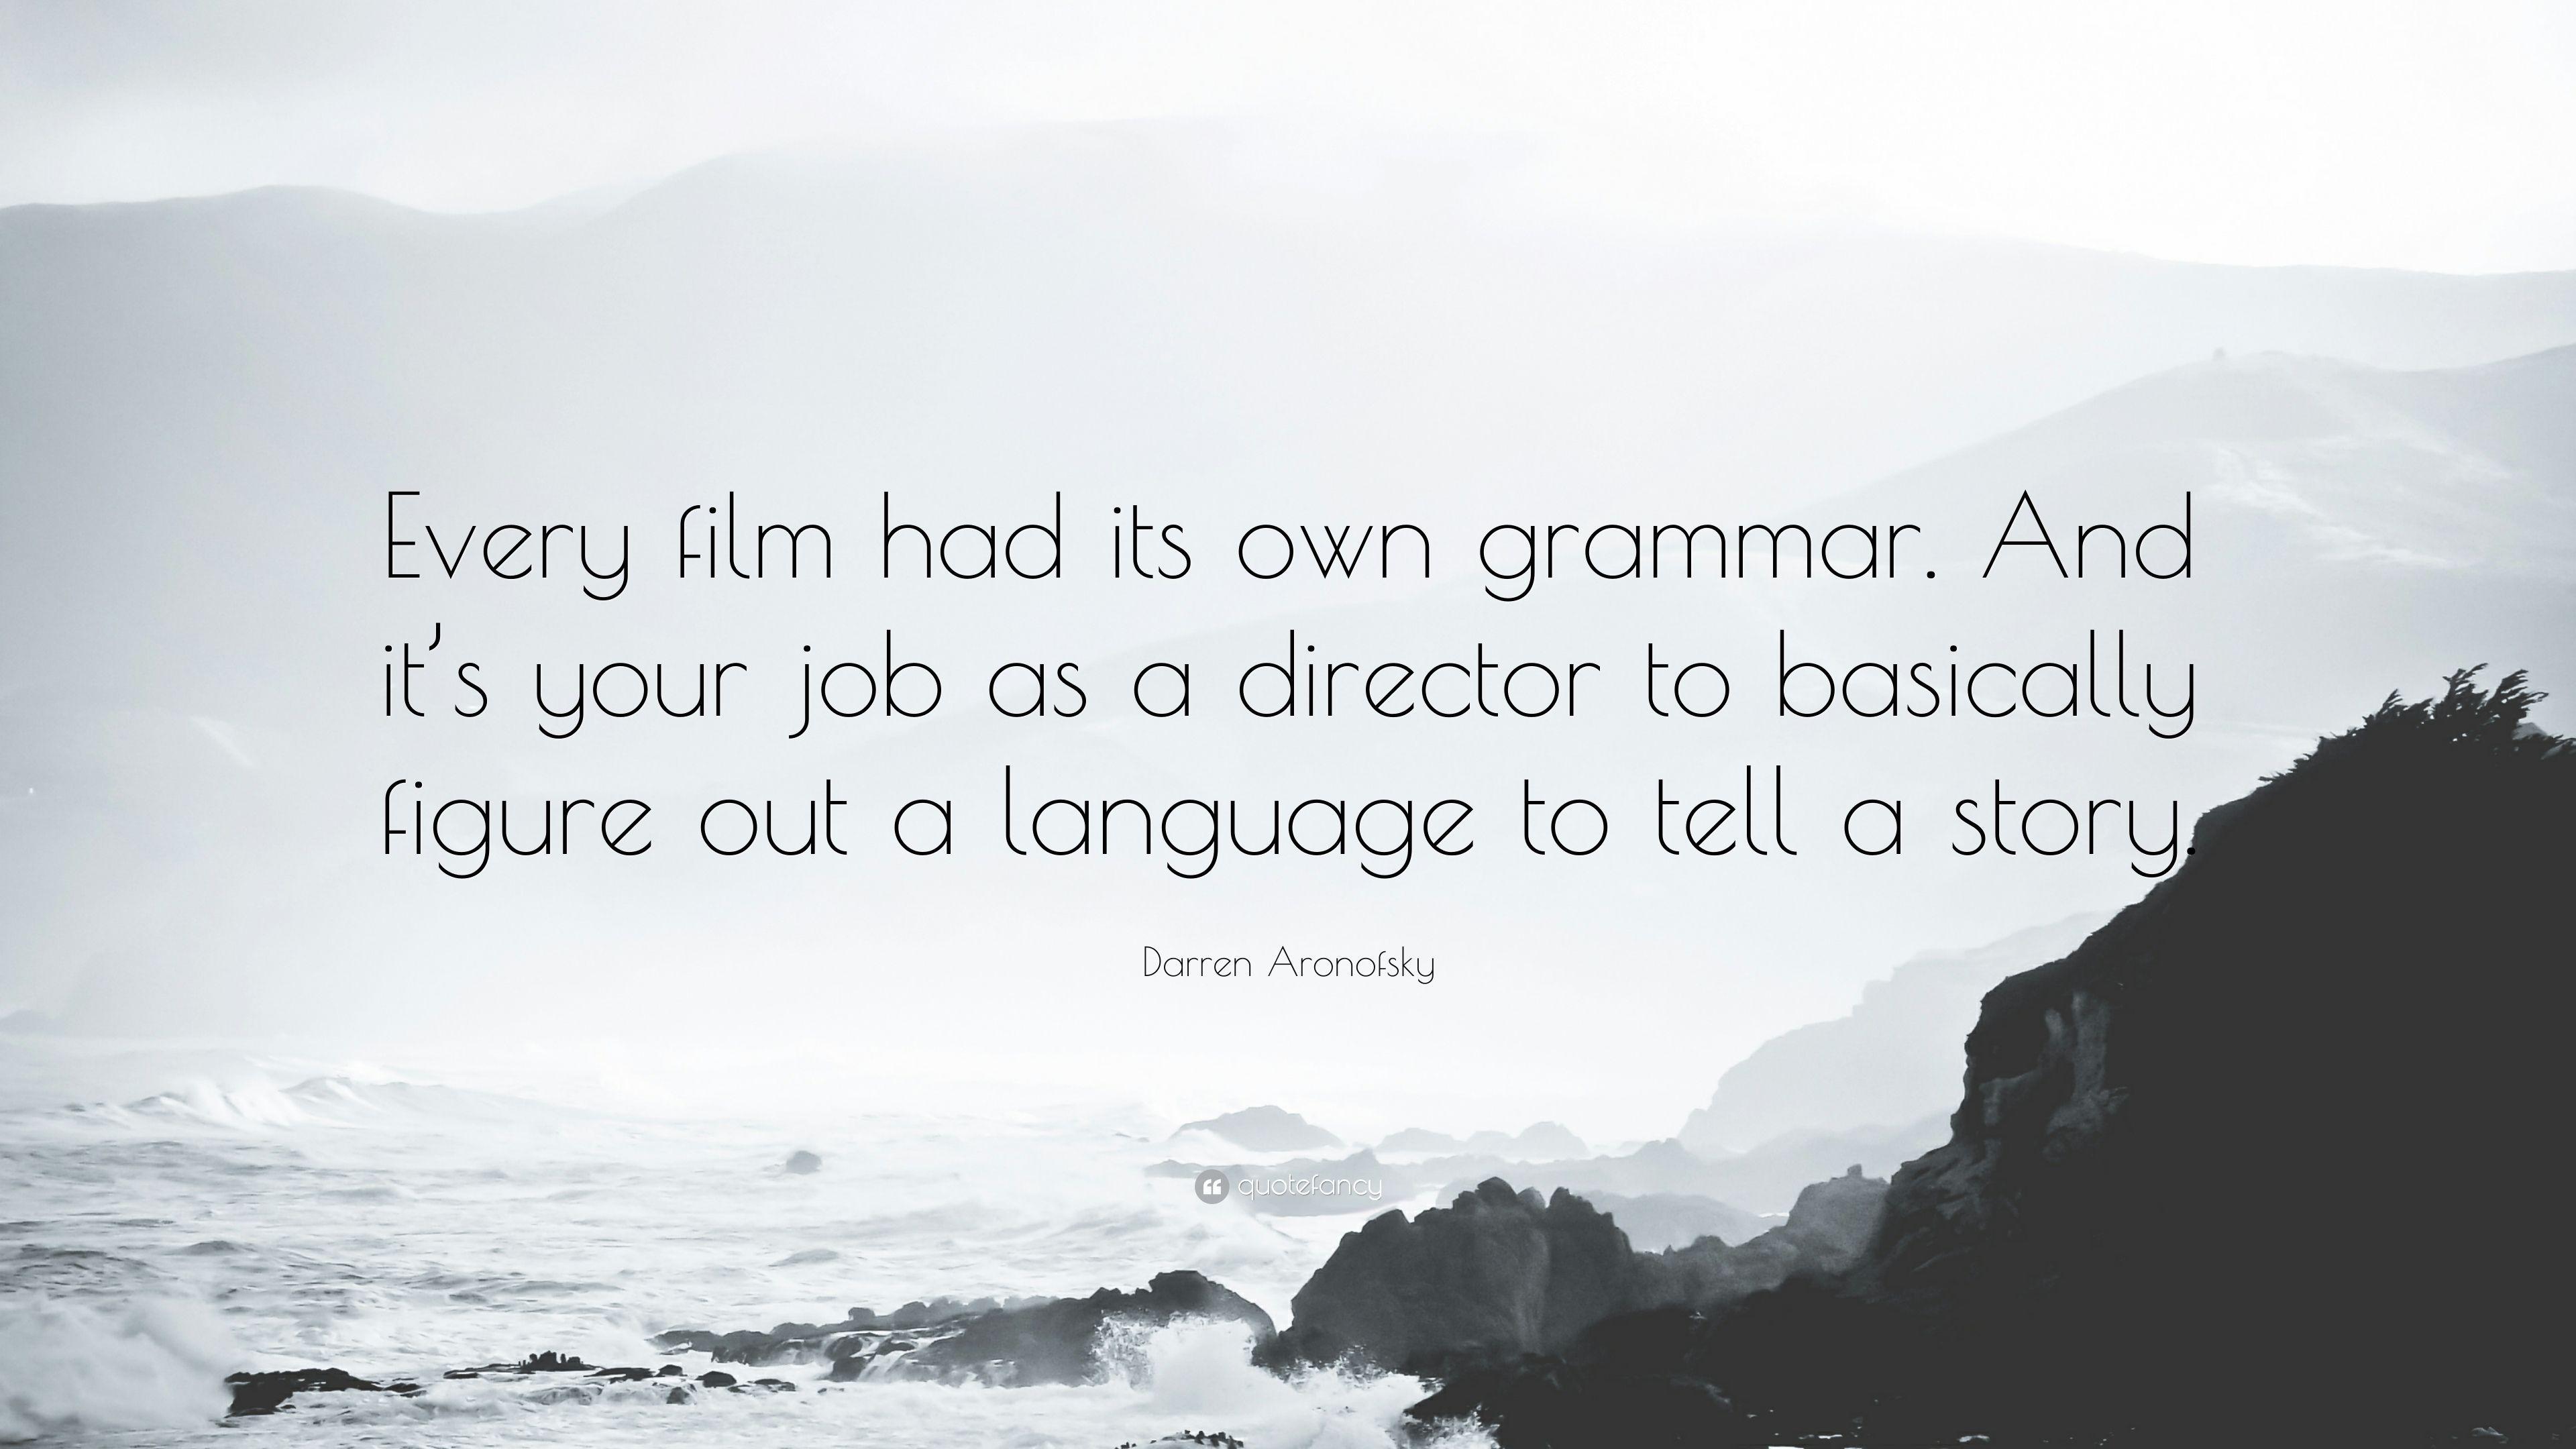 Darren Aronofsky Quote: “Every film had its own grammar. And it's